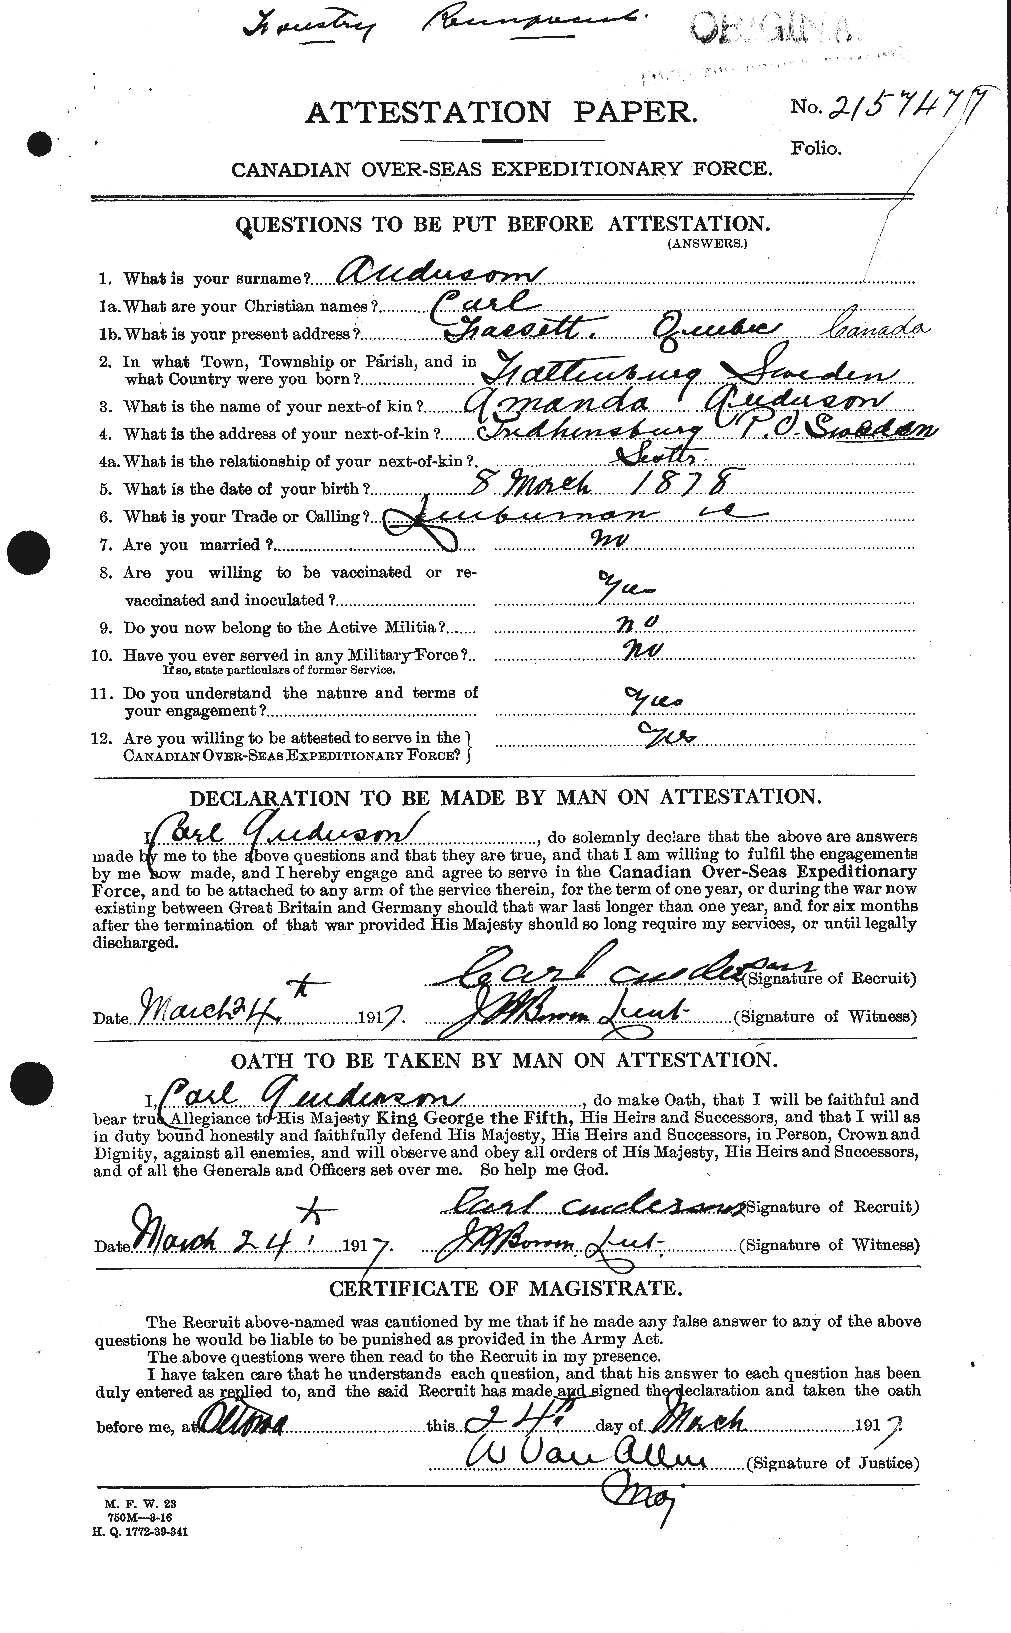 Personnel Records of the First World War - CEF 209294a